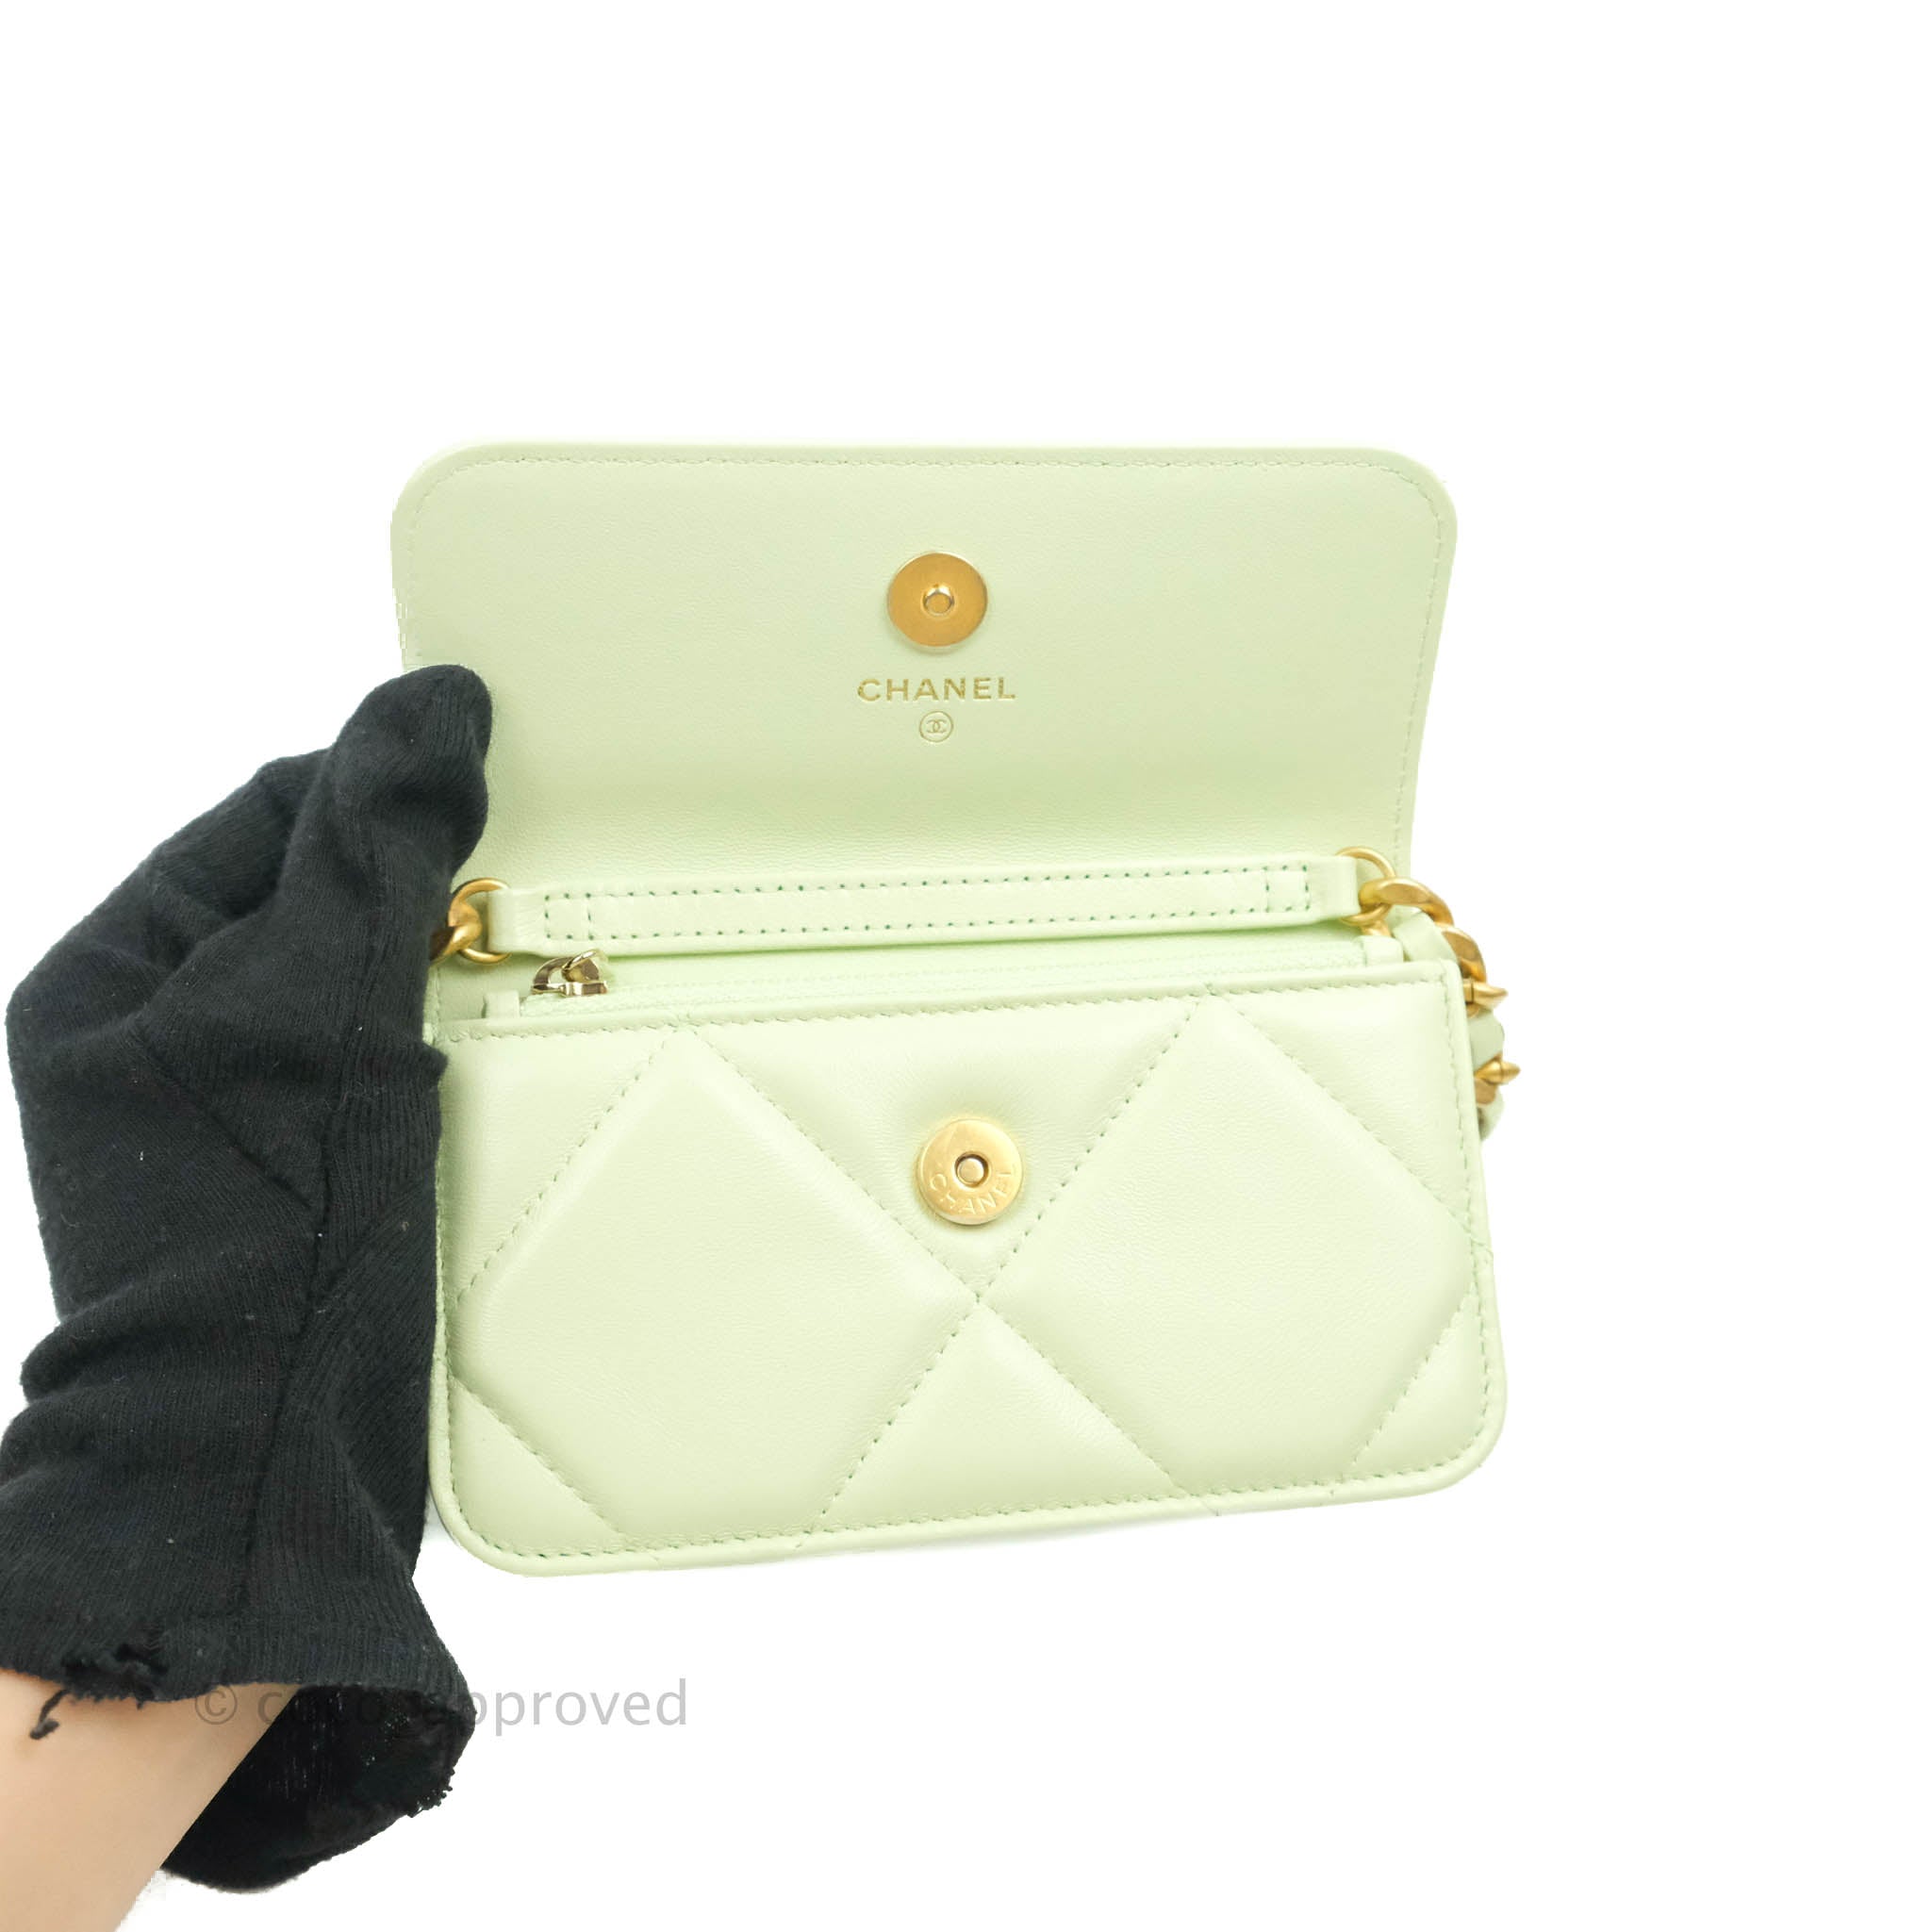 Chanel 19 Mini Clutch with Chain Light Green Lambskin Mixed Hardware 2 –  Coco Approved Studio